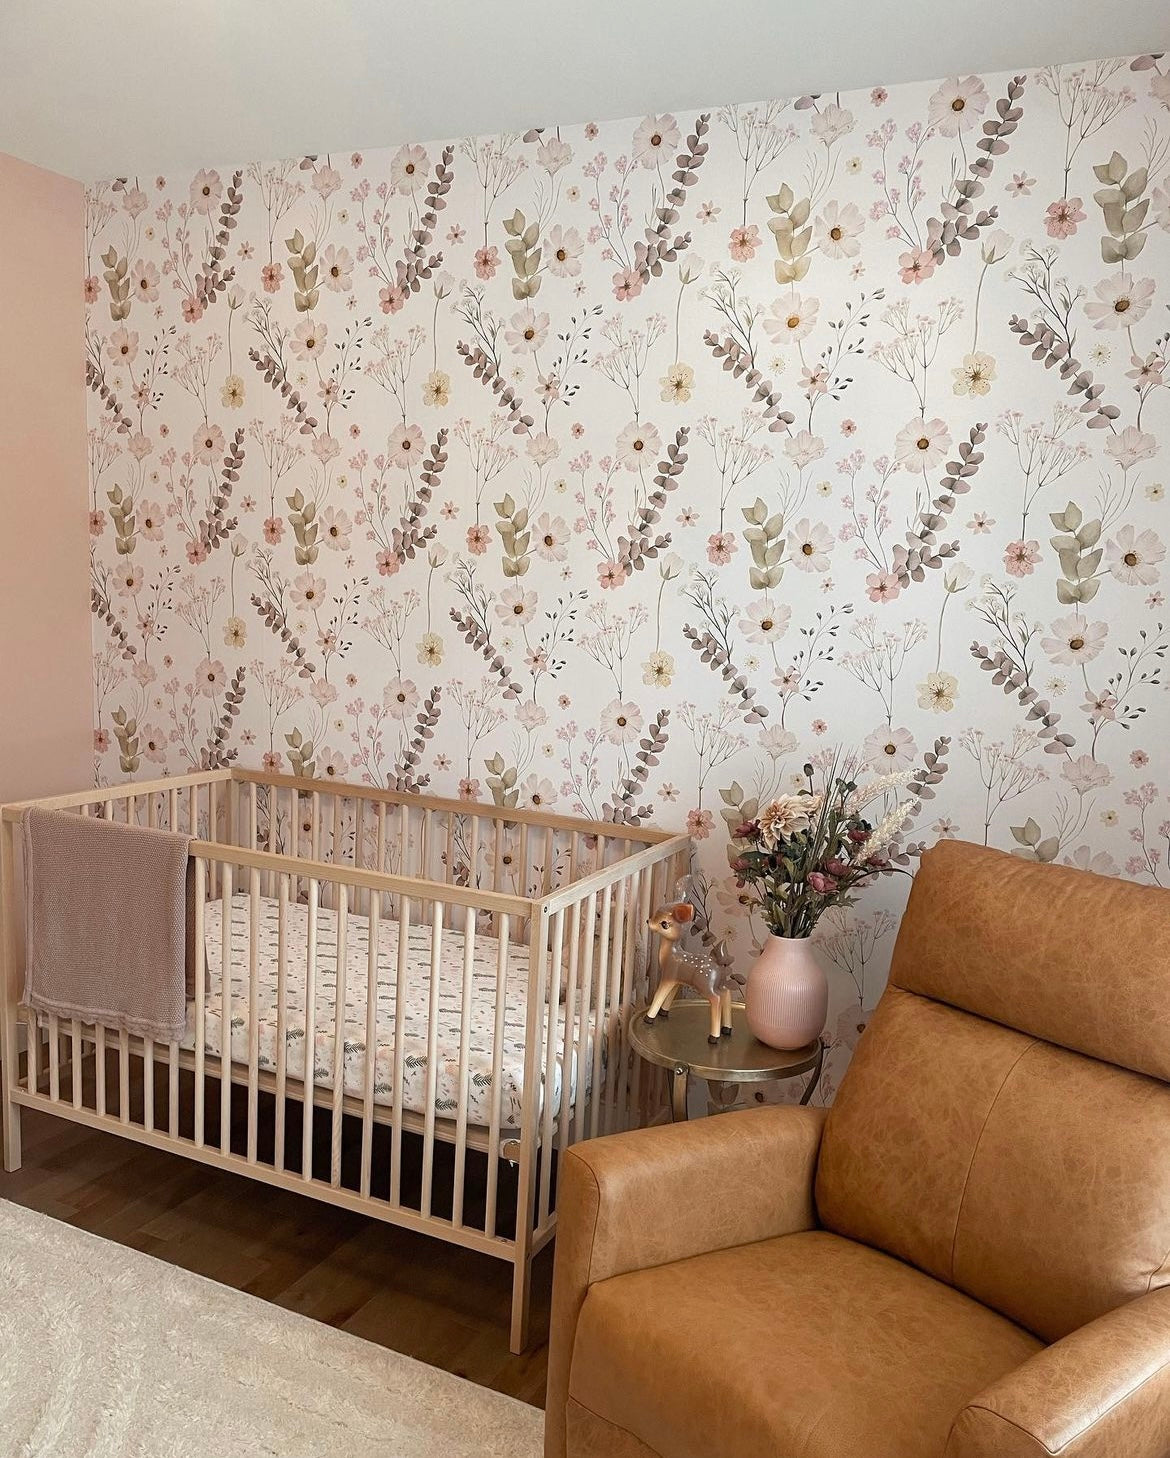 Top 10 Nursery Wallpaper Trends of the Year